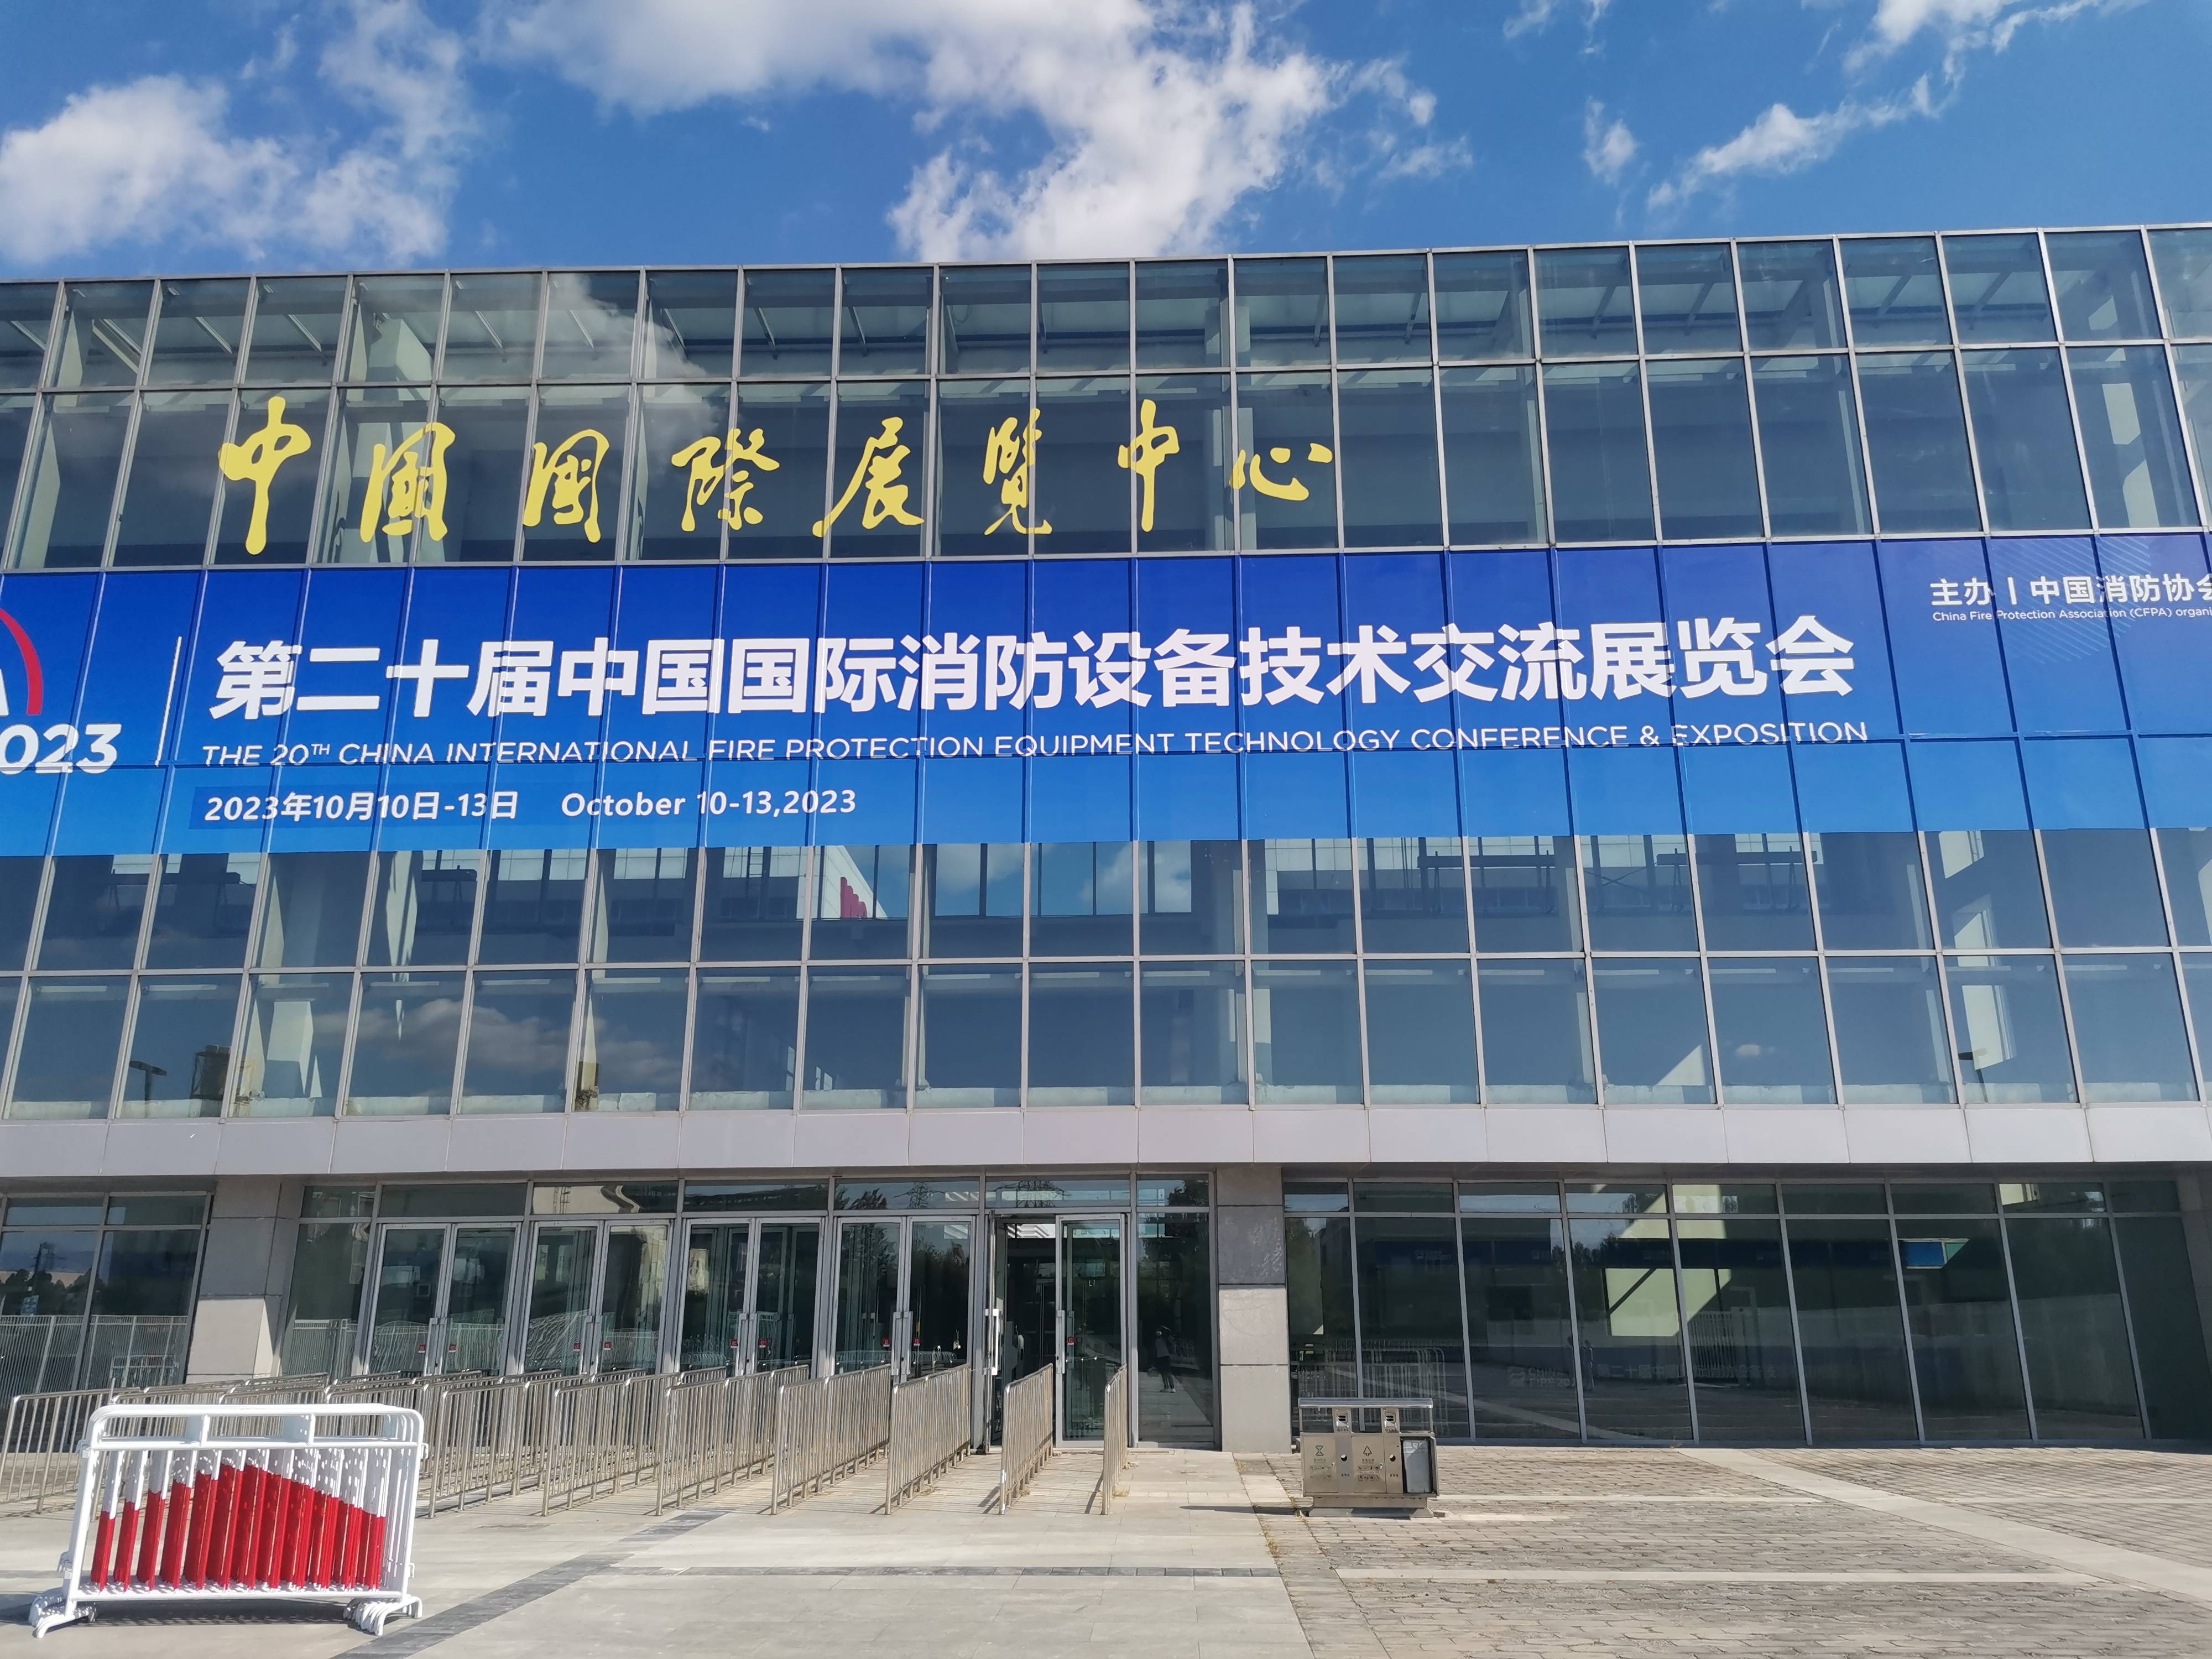 Dajia New Mateirals Co attend The 20th China International fire protection equipment Technology conference& Expostion 